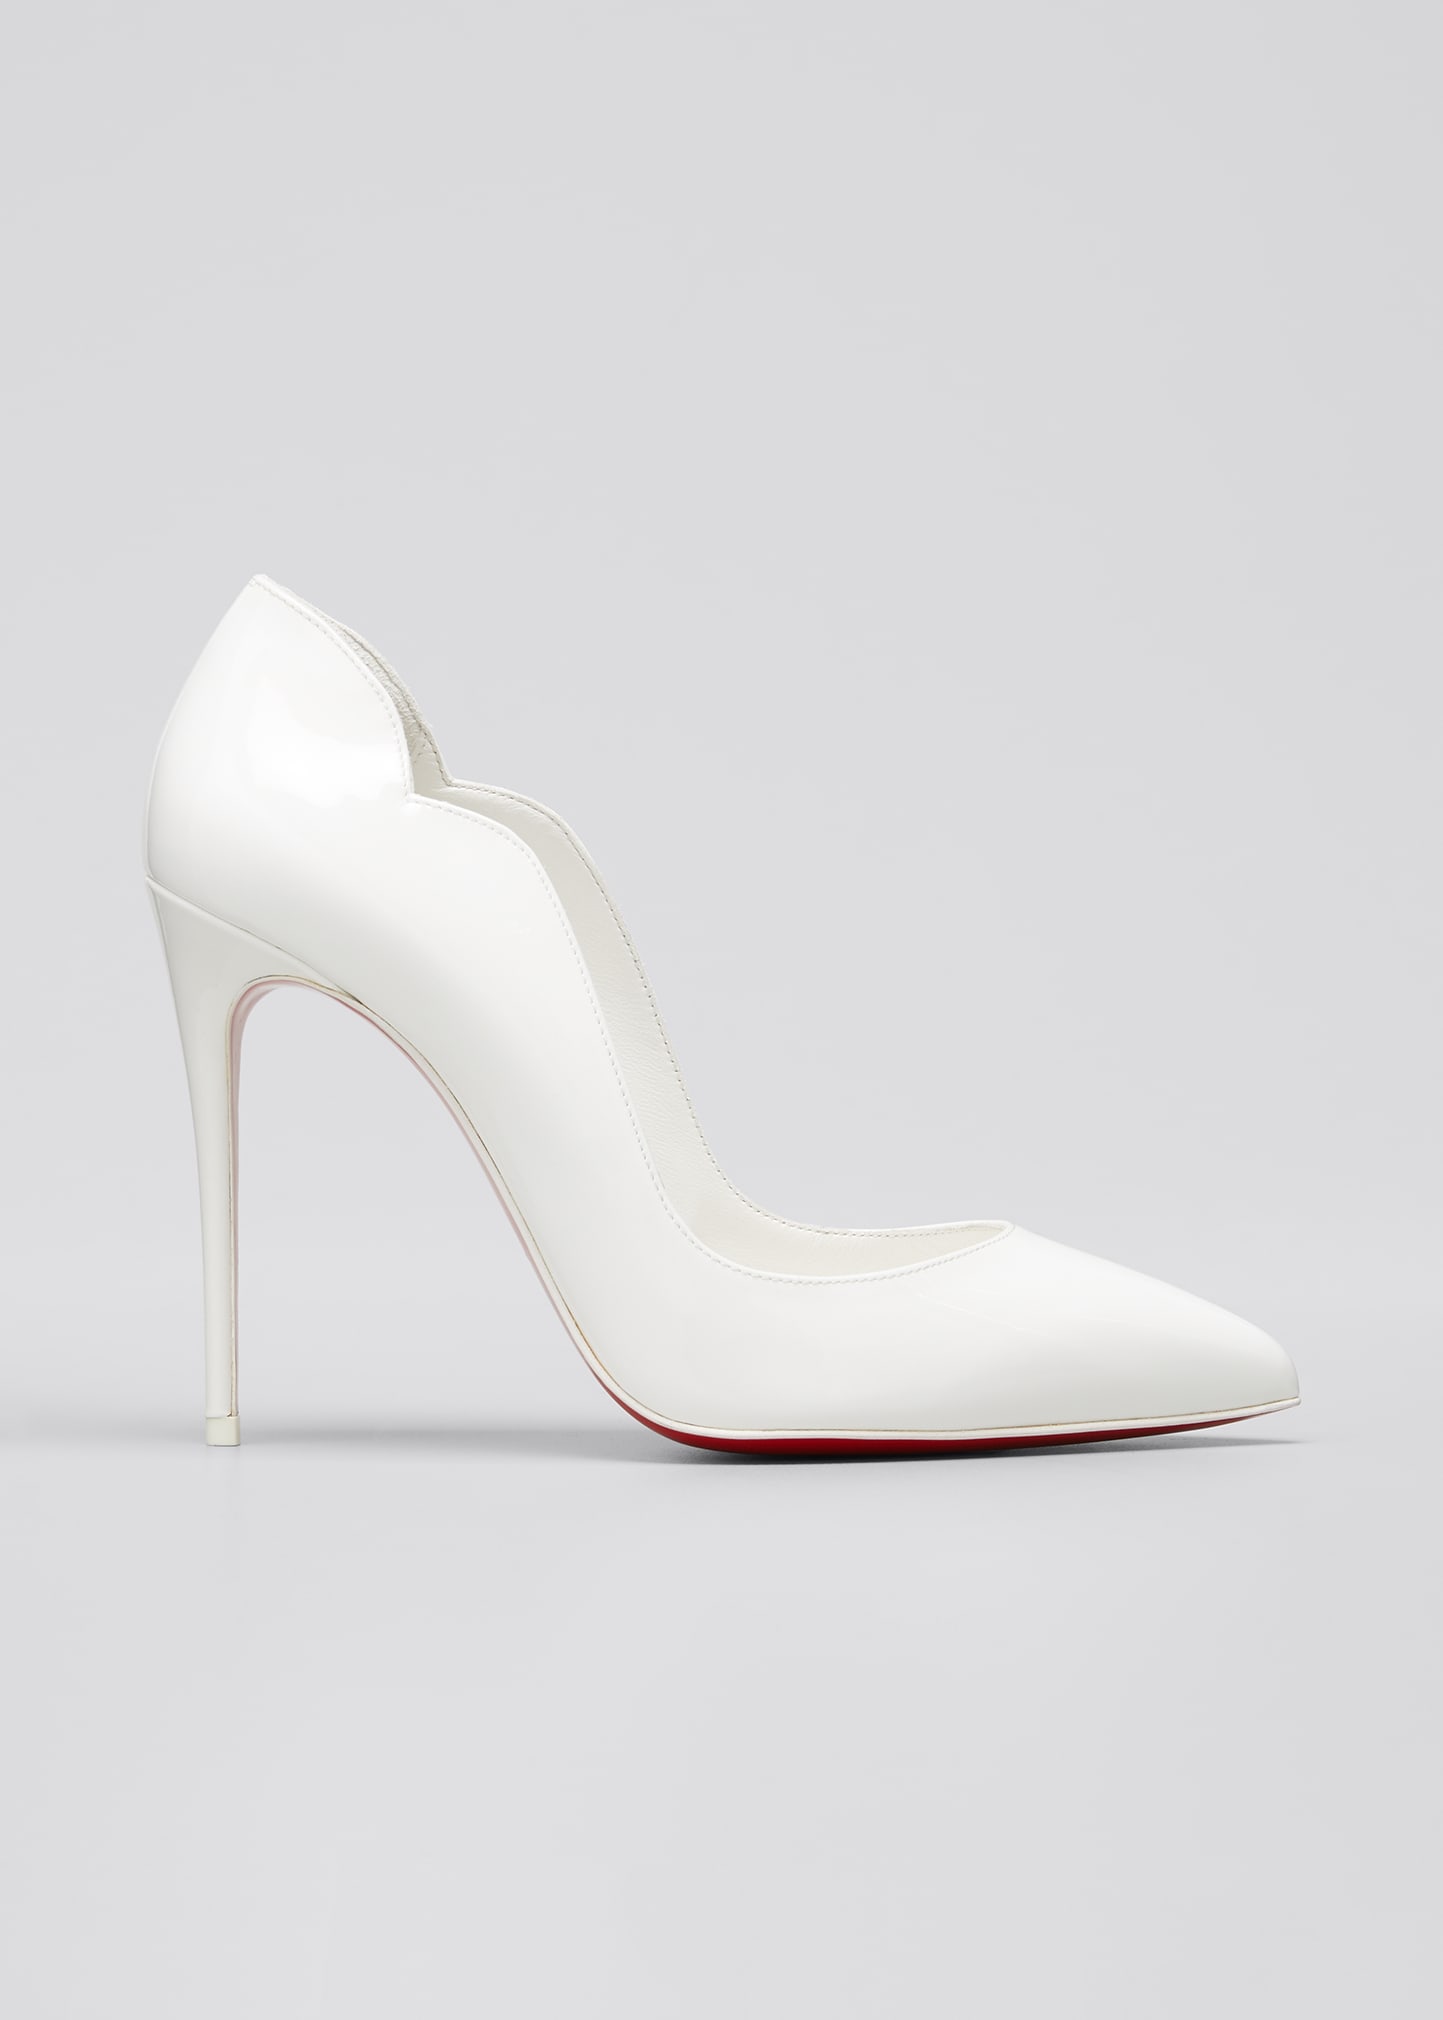 Christian Louboutin Hot Chick 100mm Patent Red Sole High-Heel Pumps